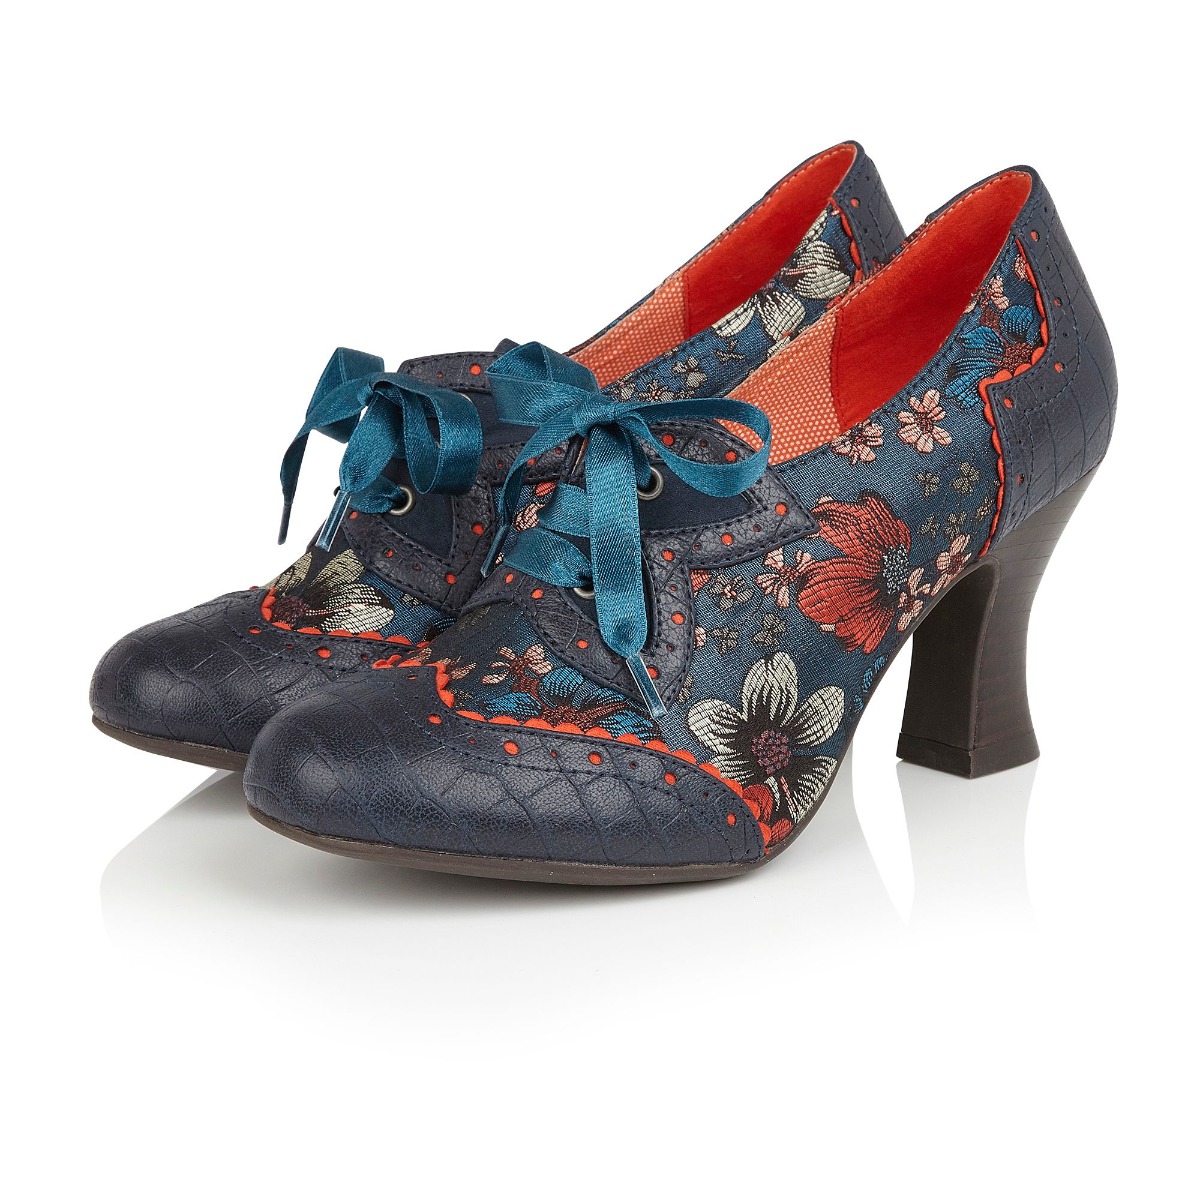 rs09307bb_chaussures-derby-pin-up-retro-50-s-glam-chic-daisy-bleu